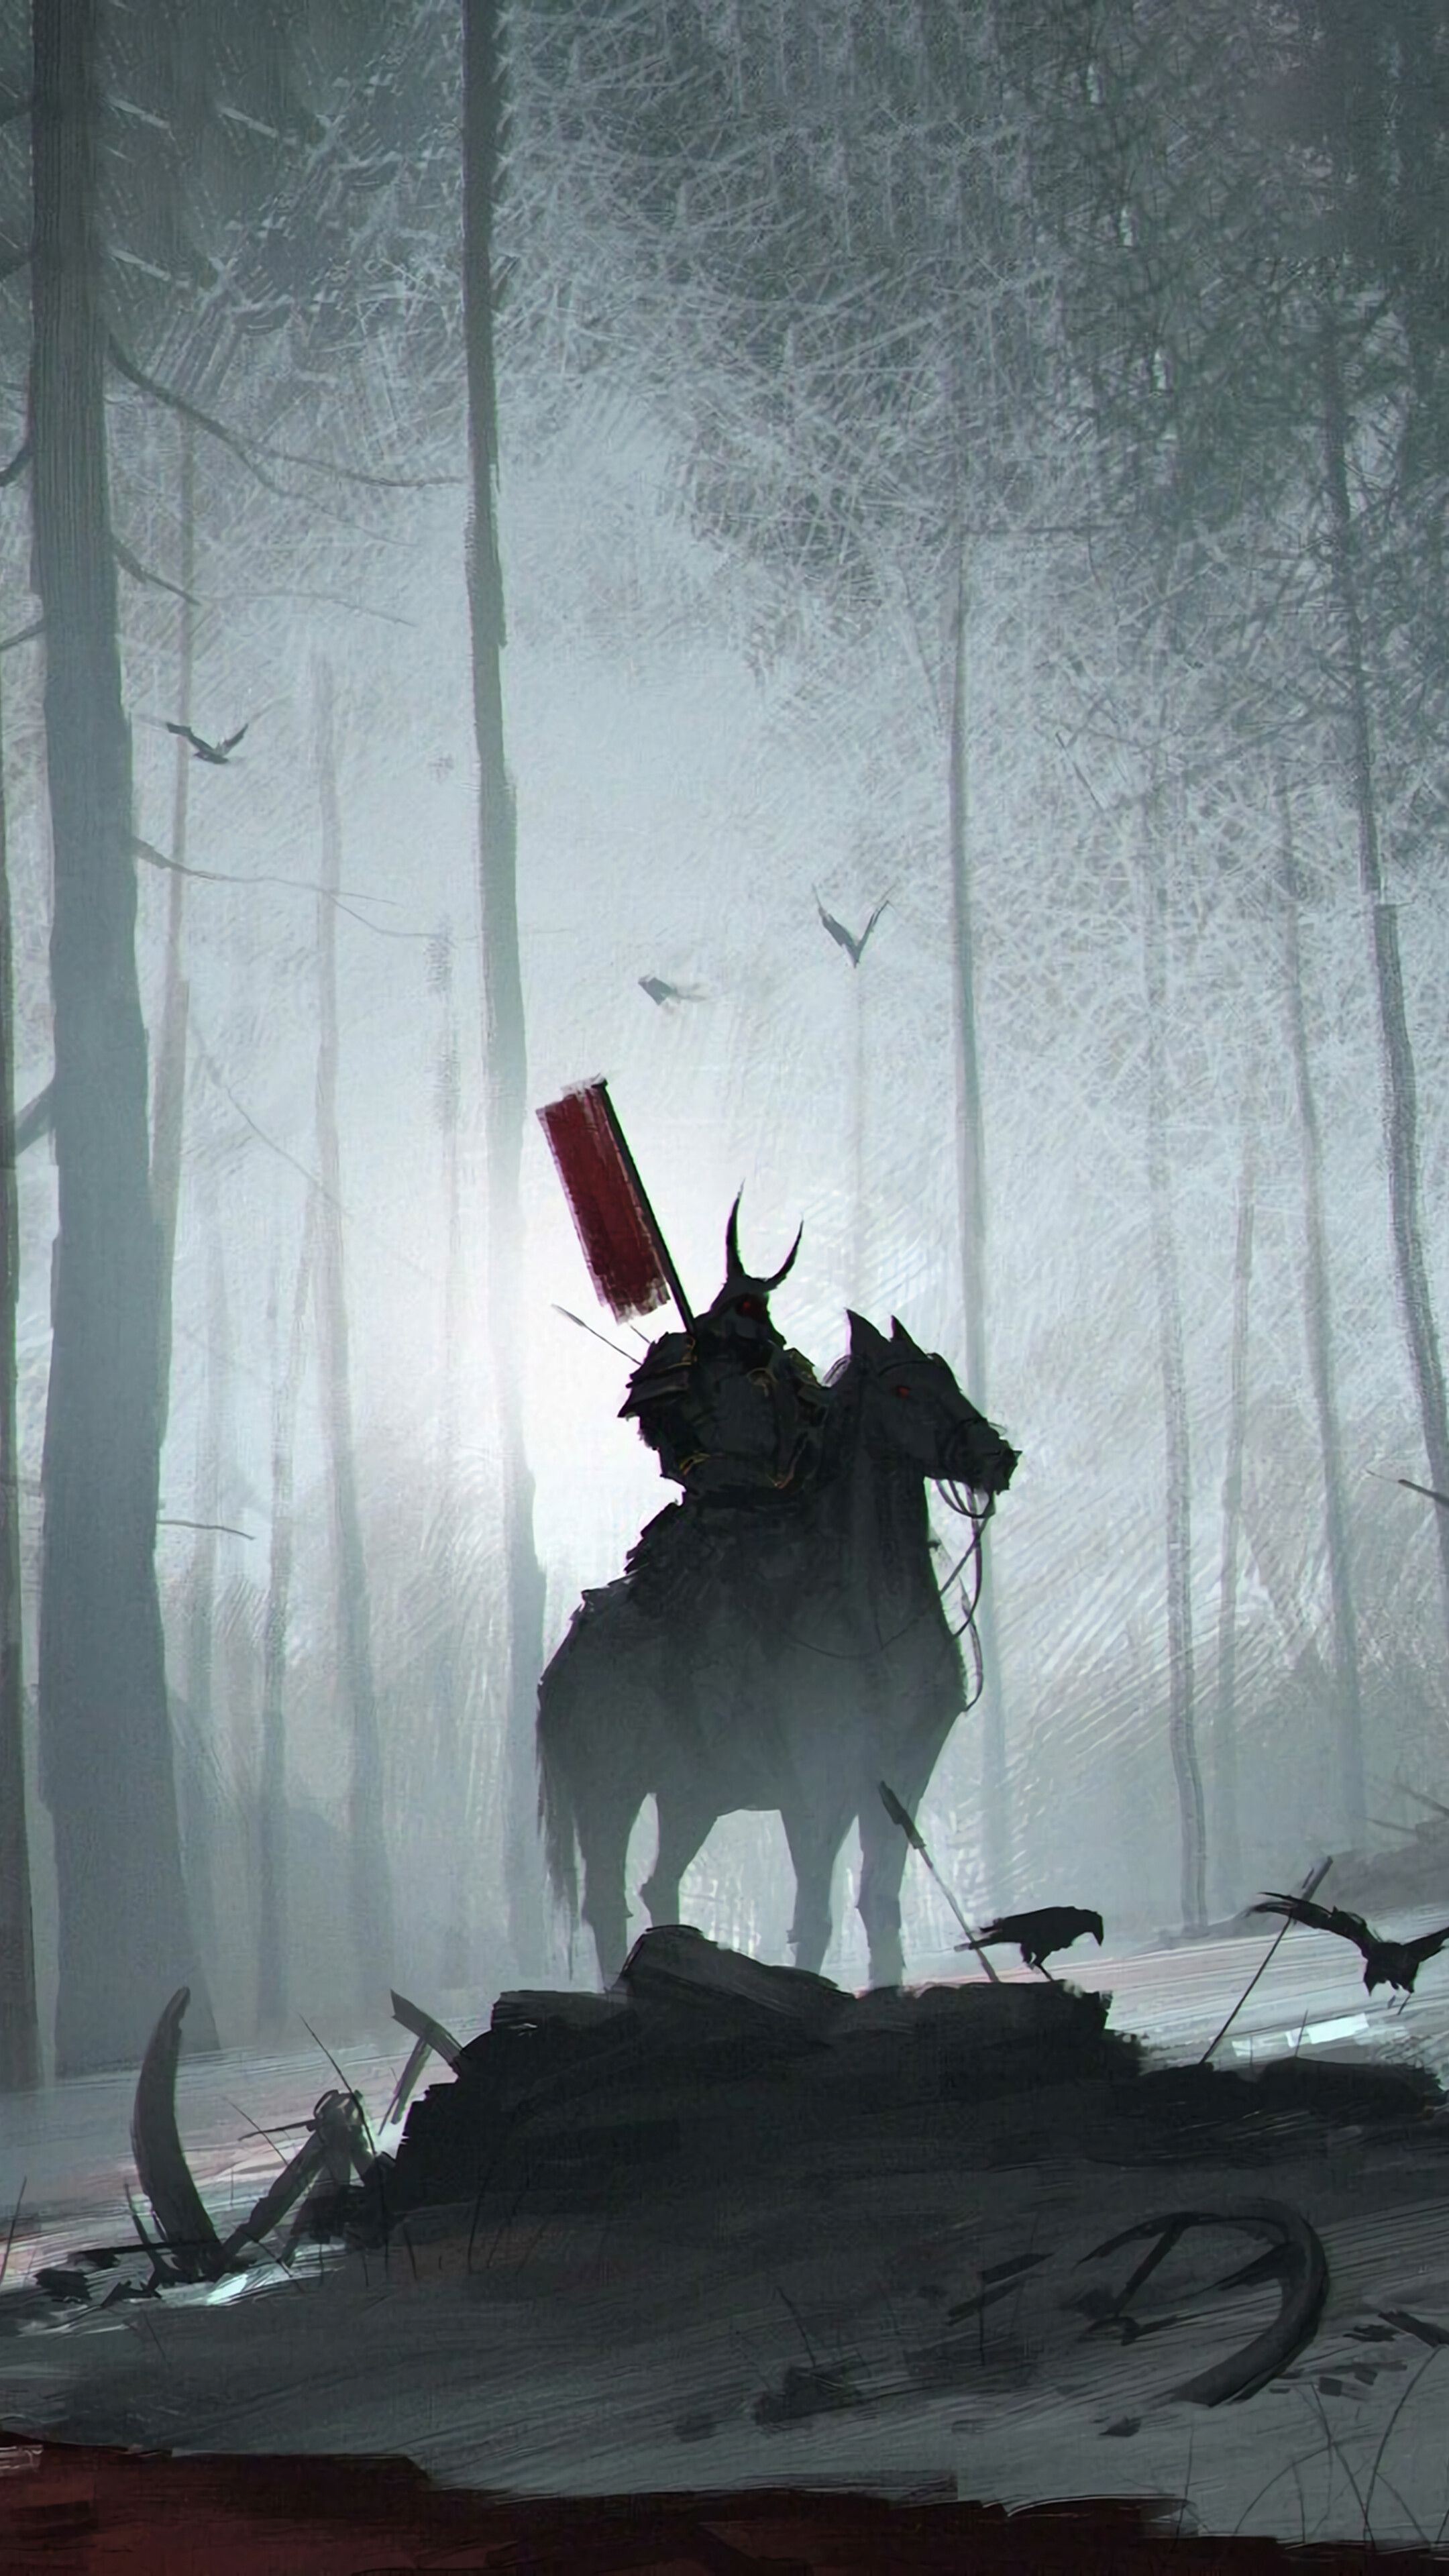 Samurai, Warrior, Forest, Art, Fantasy, 4K phone HD Wallpaper, Image, Background, Photo and Picture. Mocah HD Wallpaper